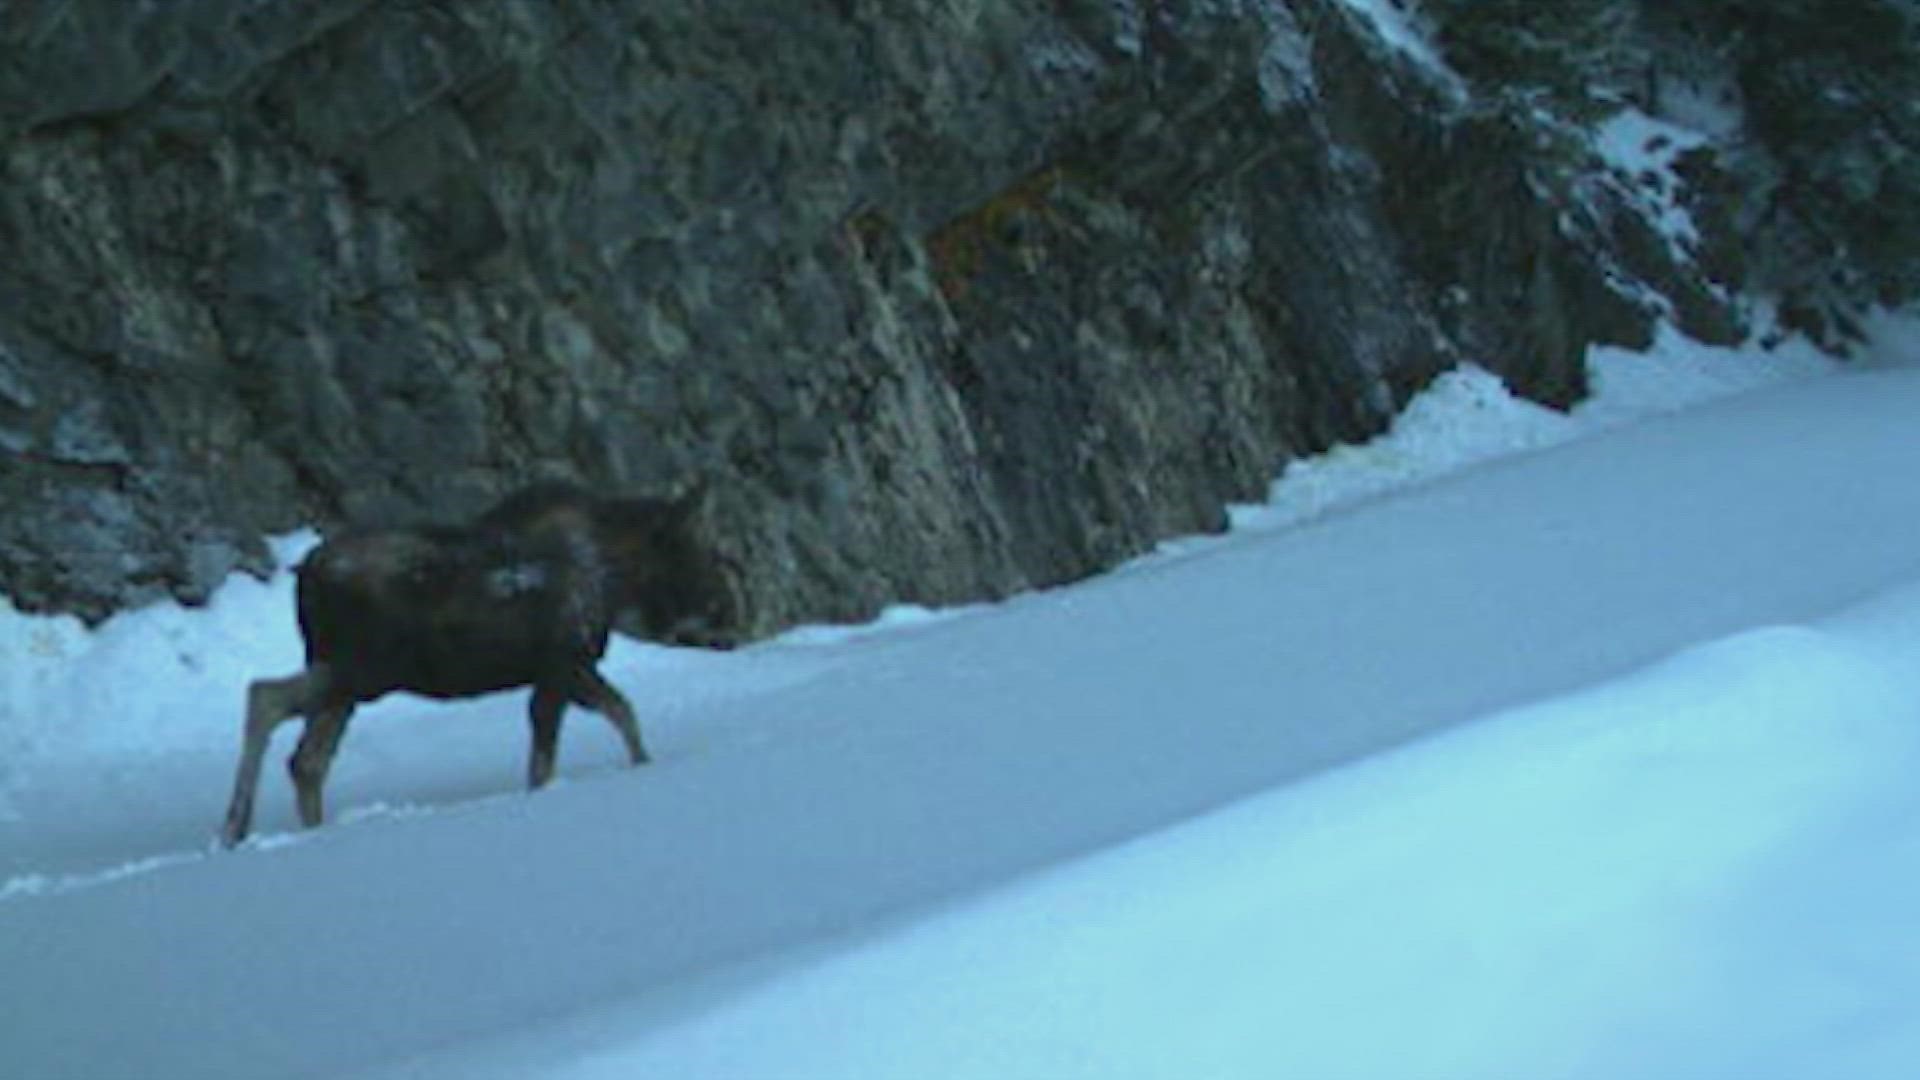 The moose was also the first ever spotted in southwest Washington.